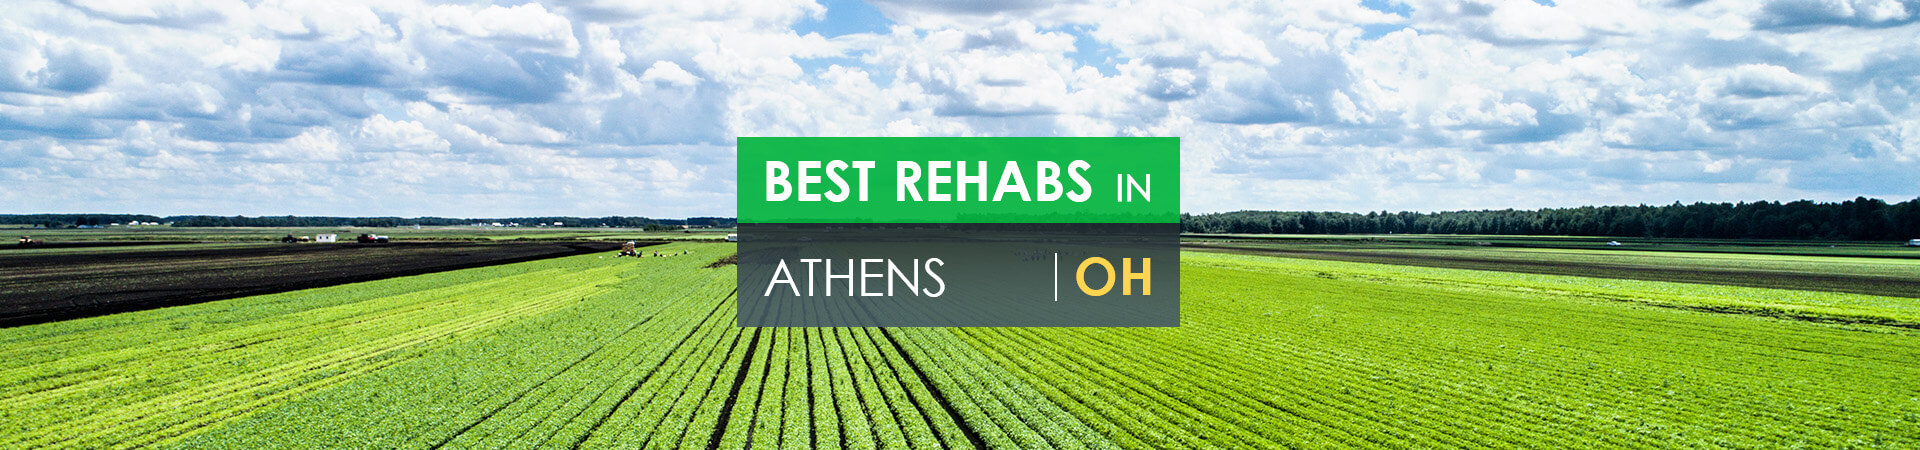 Best rehabs in Athens, OH